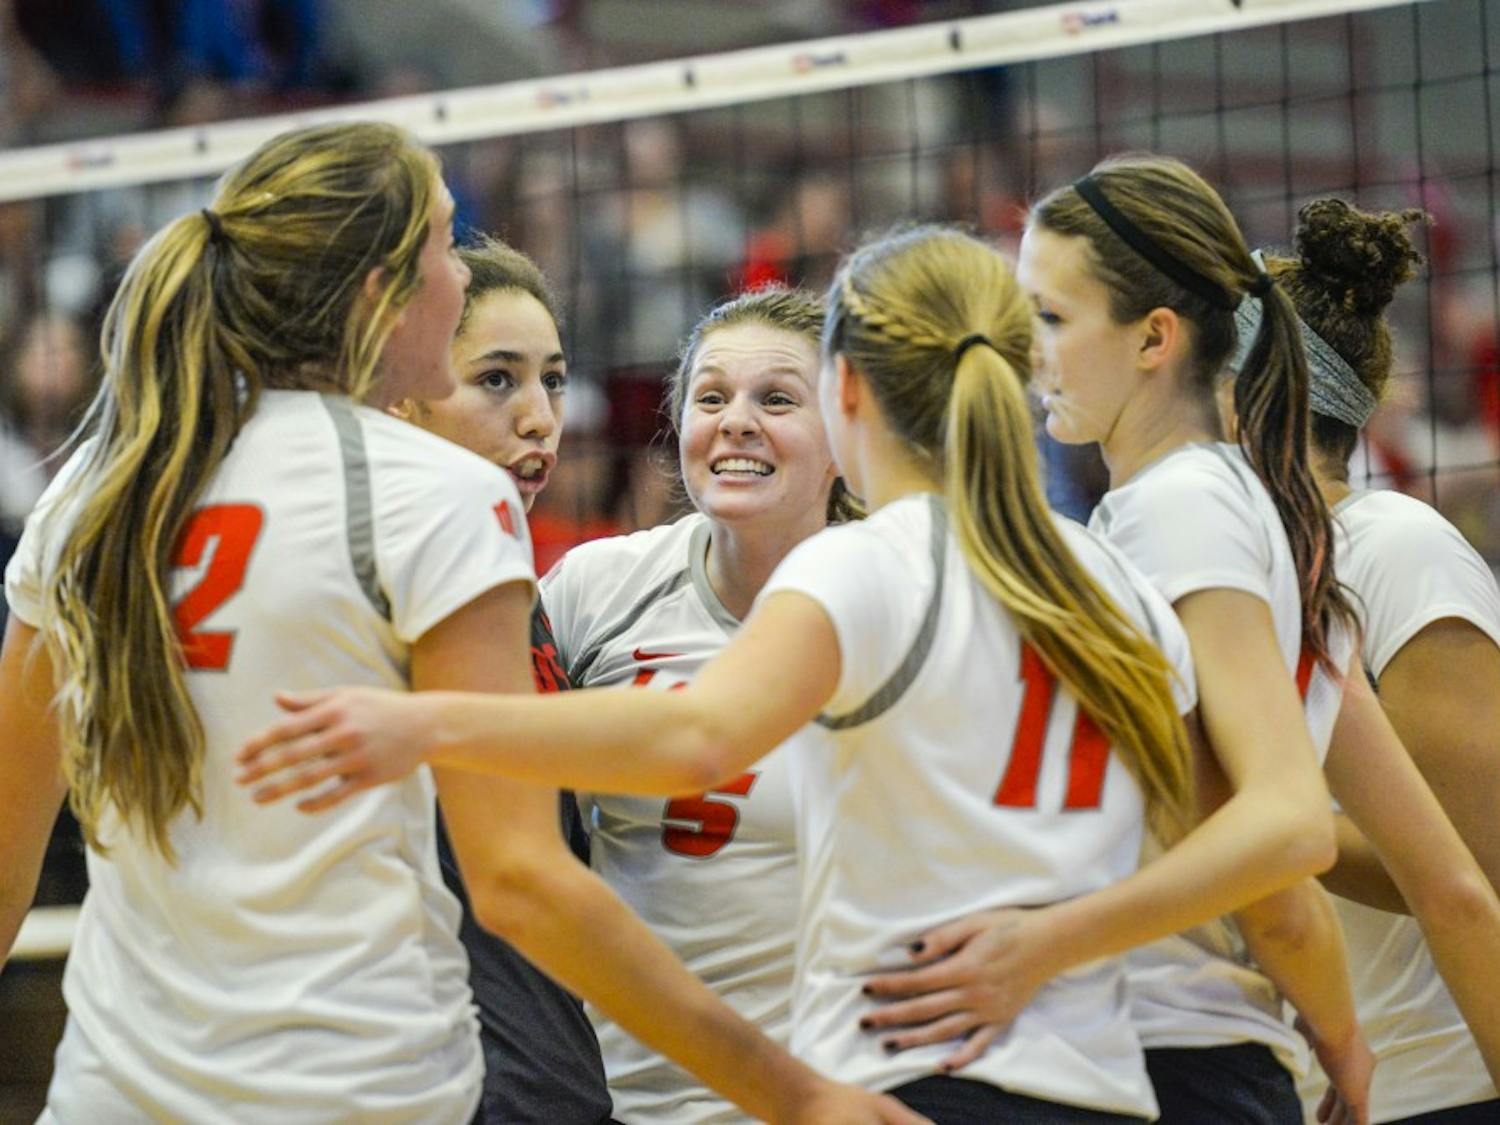 The Lobos huddle together and celebrate a kill against San Jose State Saturday, Oct. 29, 2016 at Johnson Center Gym. The lobos swept San Jose State 3-0.&nbsp;